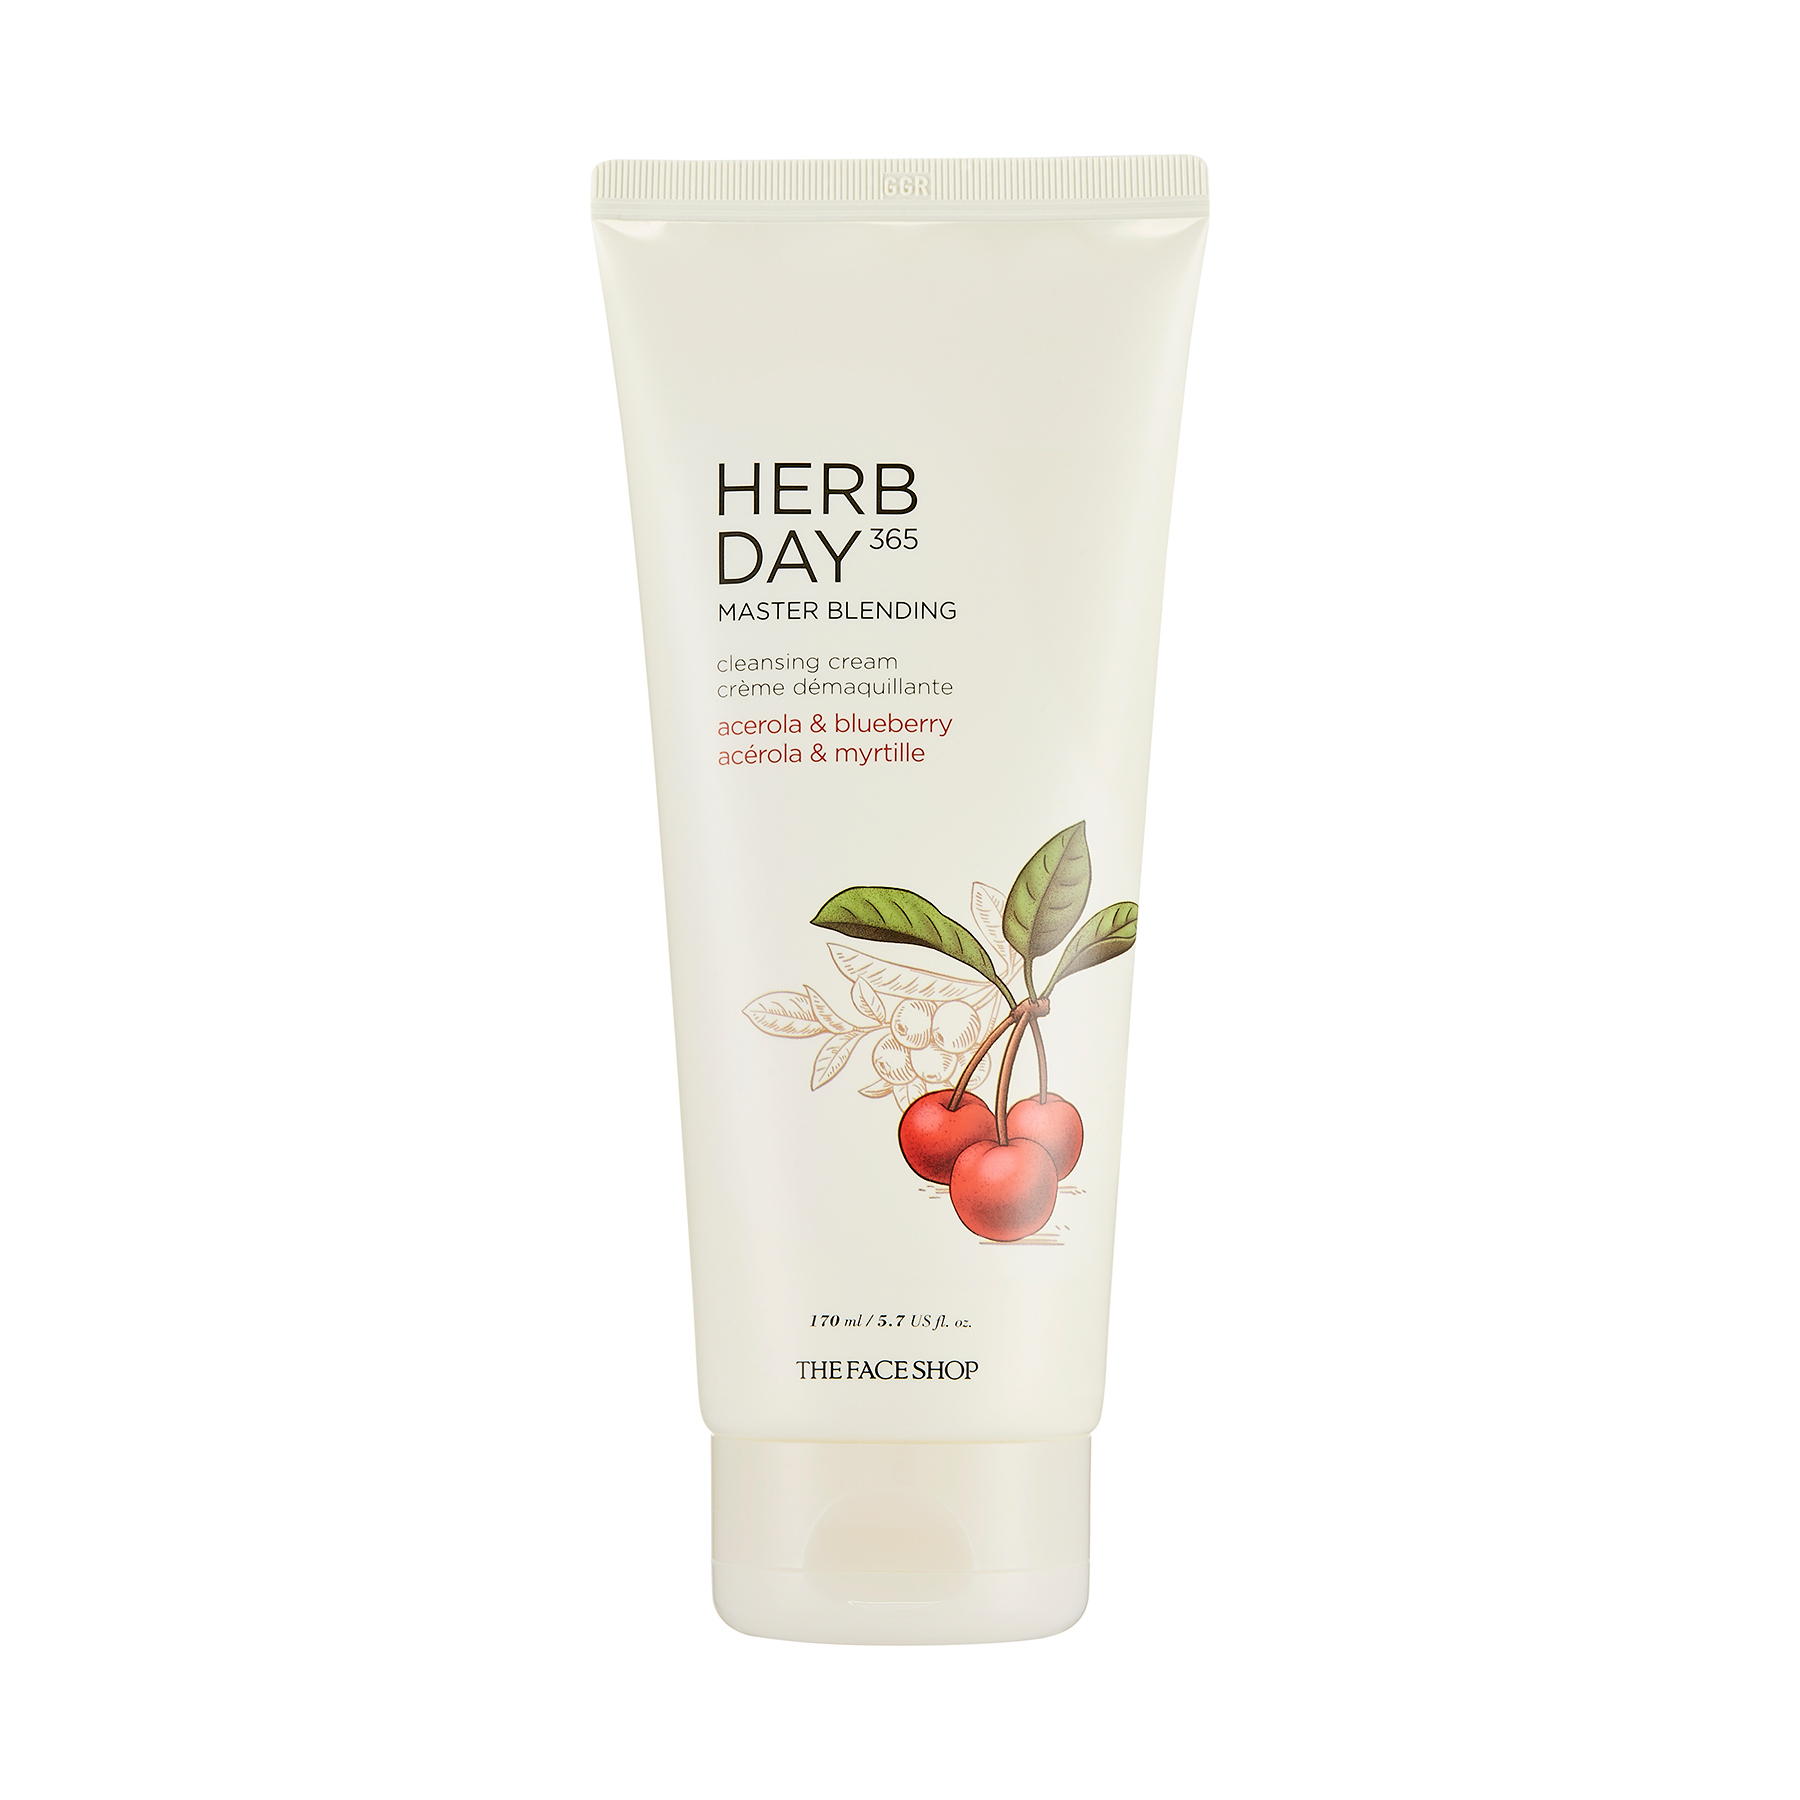 Herb Day 365 Master Blending Cleansing Cream Acerola & Blueberry